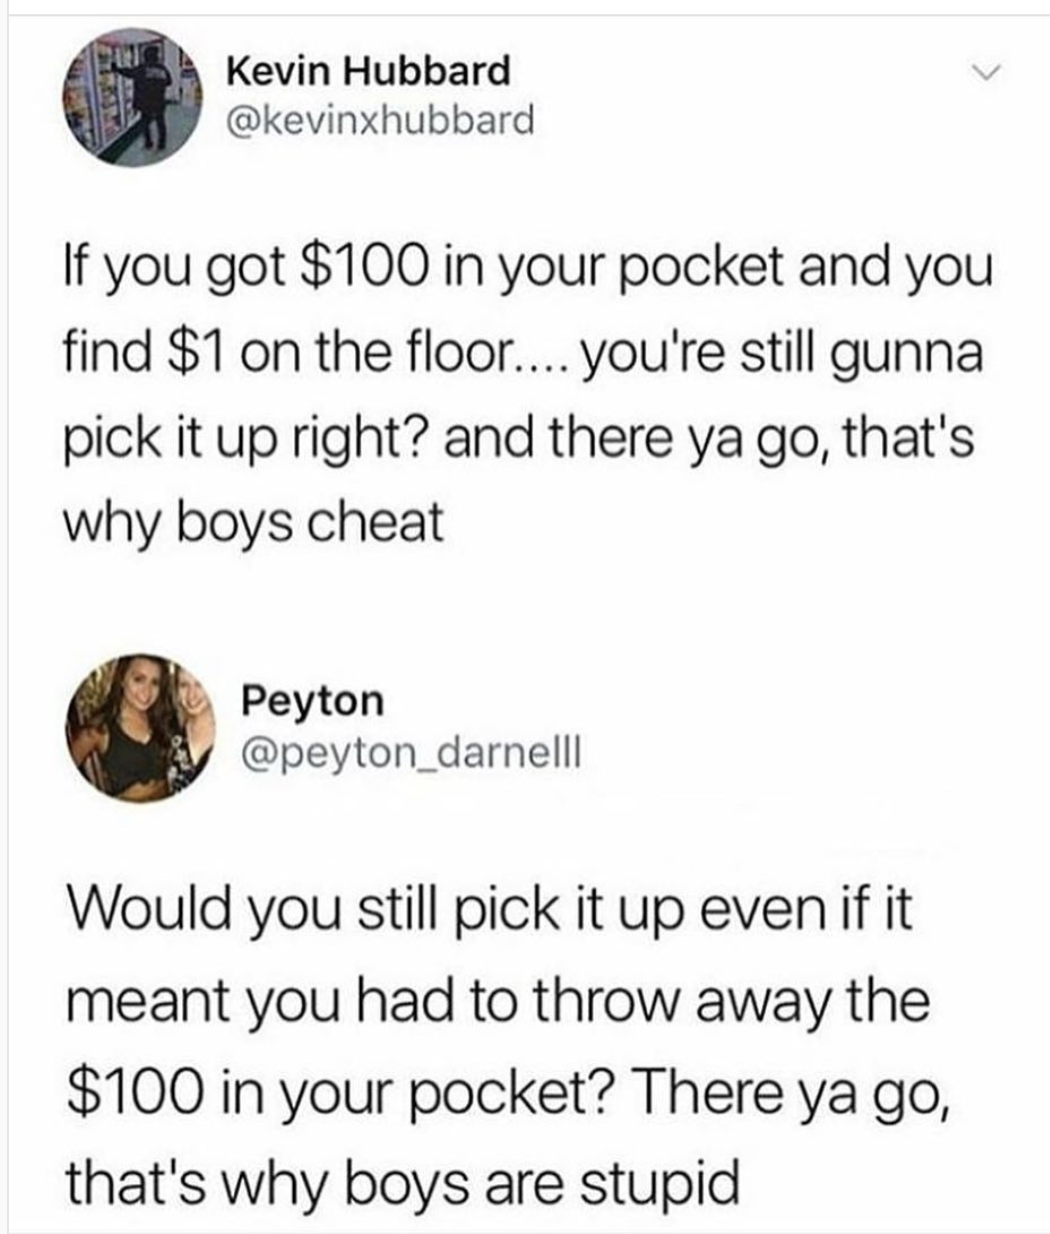 relationship memes of twitter quotes about boys Kevin Hubbard If you got $100 in your pocket and you find $1 on the floor.... you're still gunna pick it up right? and there ya go, that's why boys cheat Peyton Would you still pick it up even if it meant yo